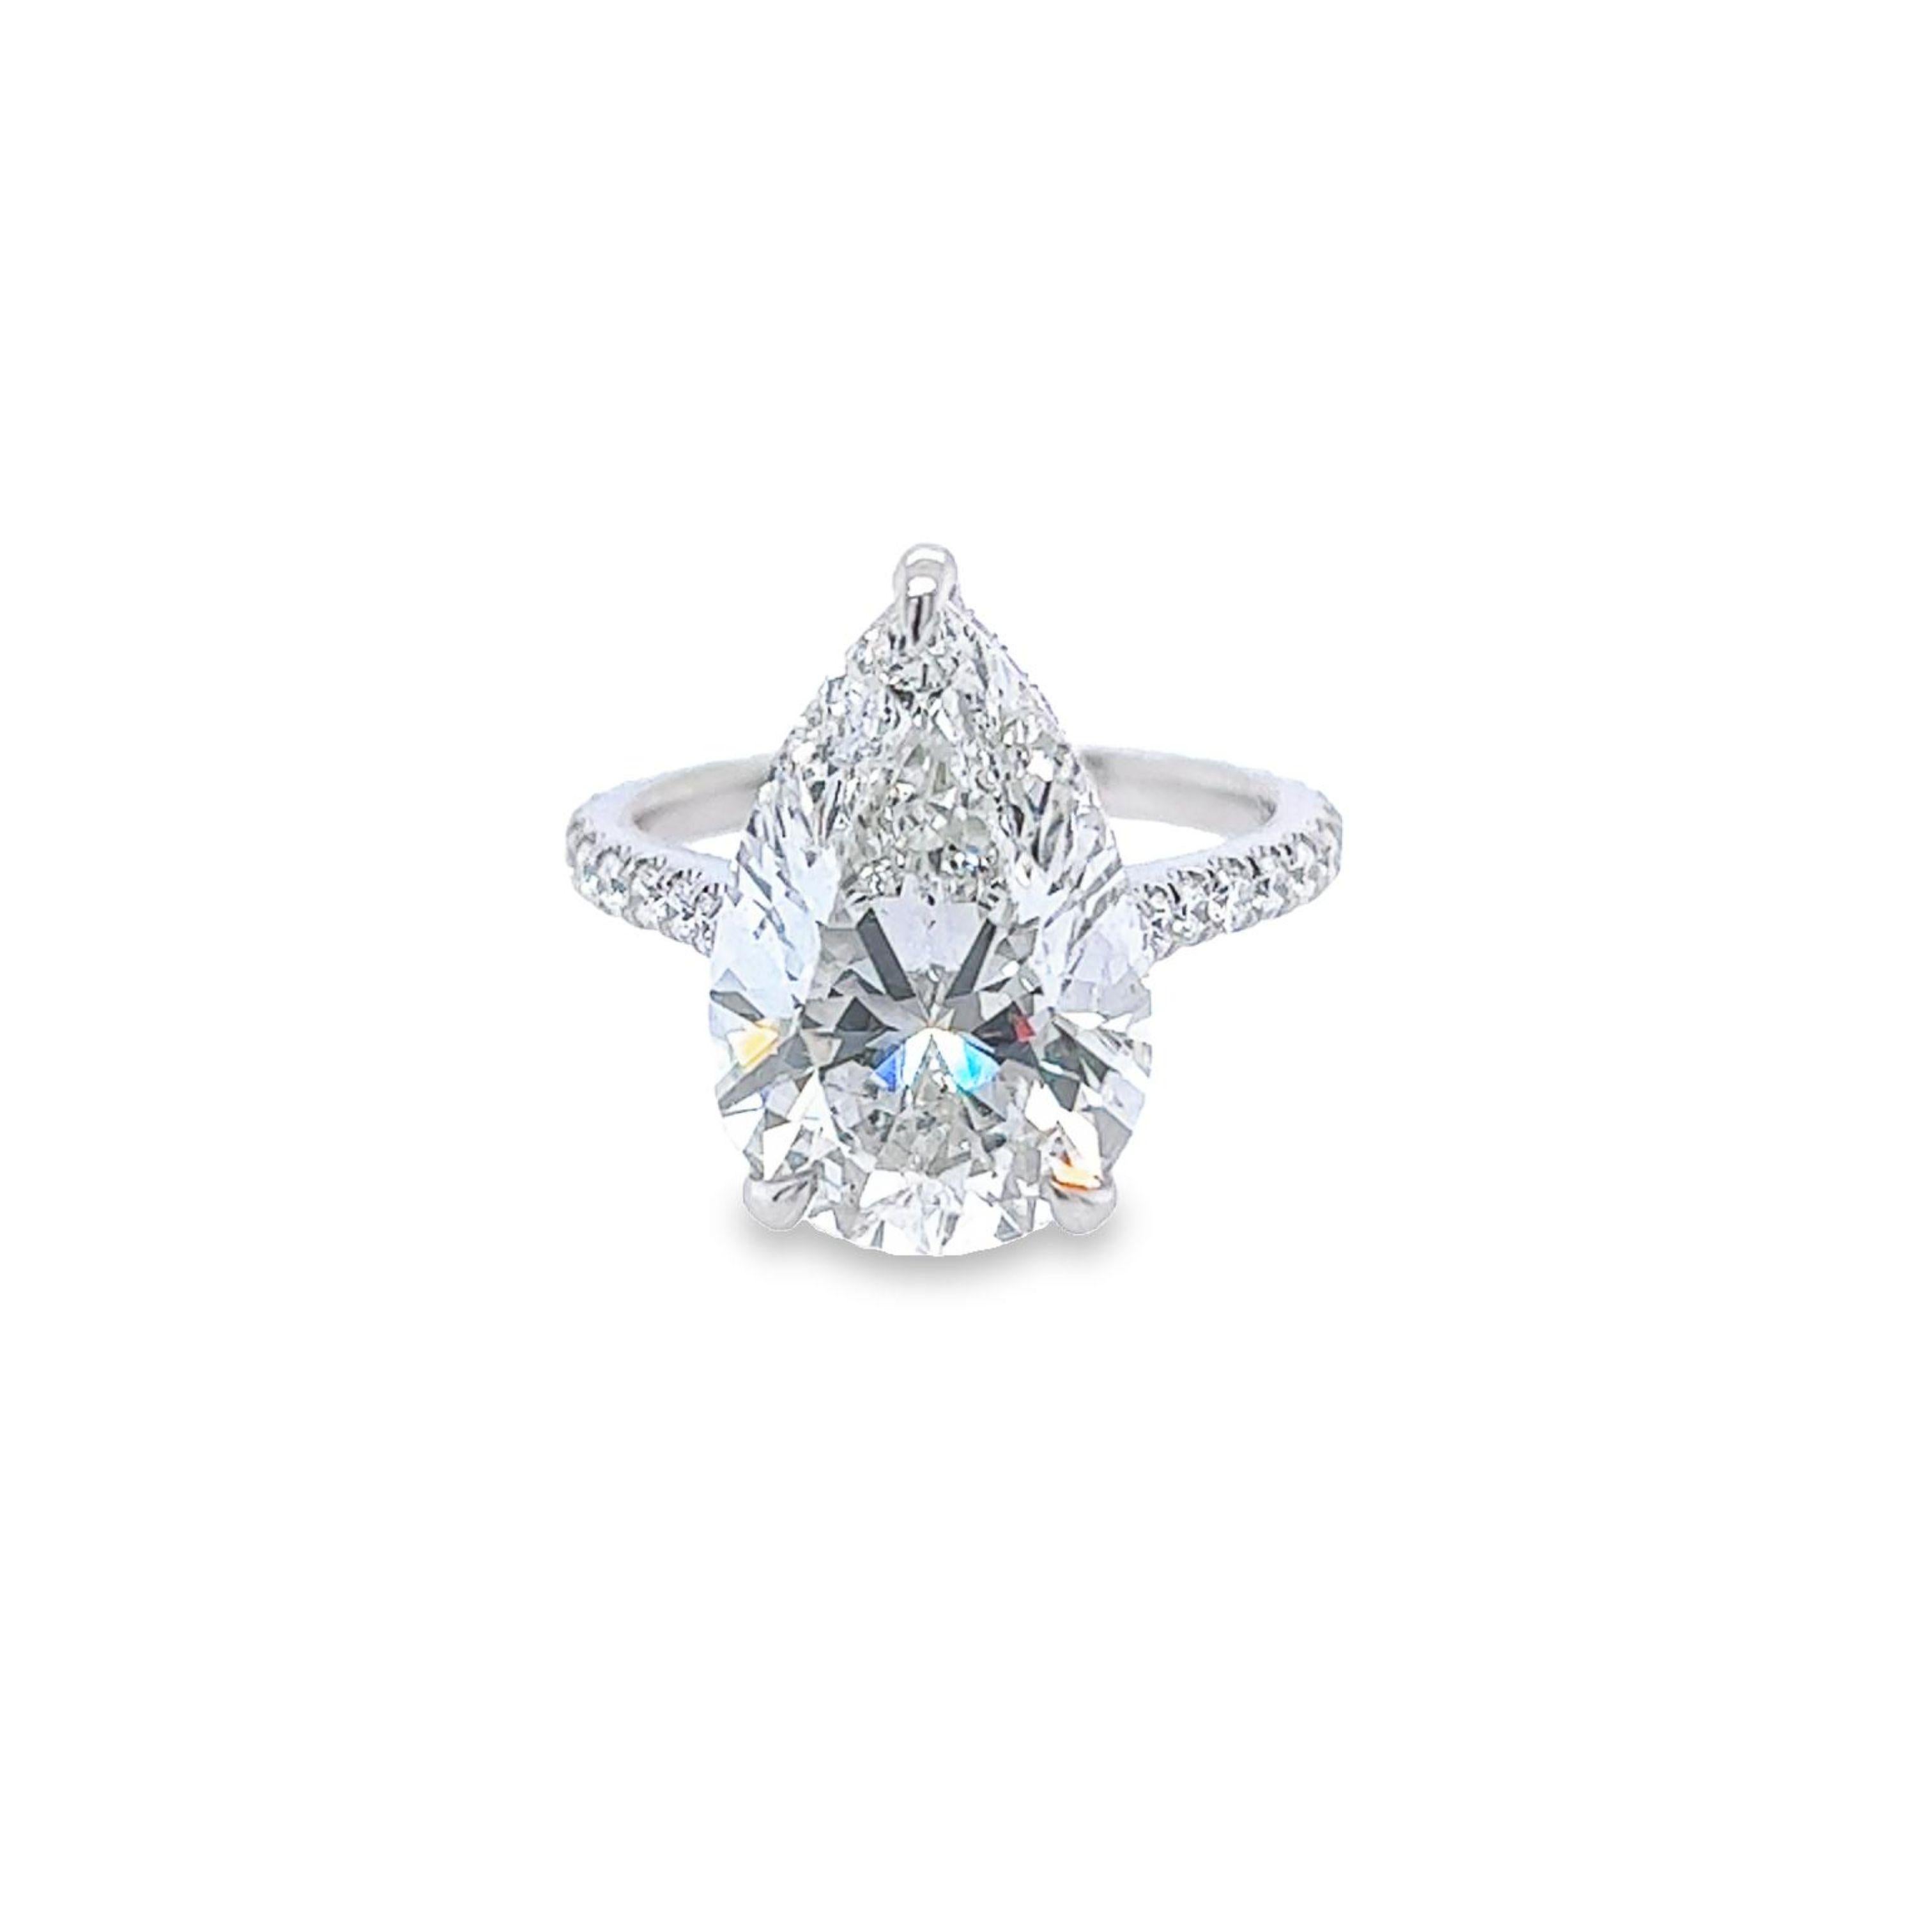 Rosenberg Diamonds & Co. 7.04 carat Pear shape H color SI1 clarity is accompanied by a GIA certificate. This Exceptional SI1 Pear shape is full of brilliance and it is set in a handmade platinum setting. This ring continues its elegance with a